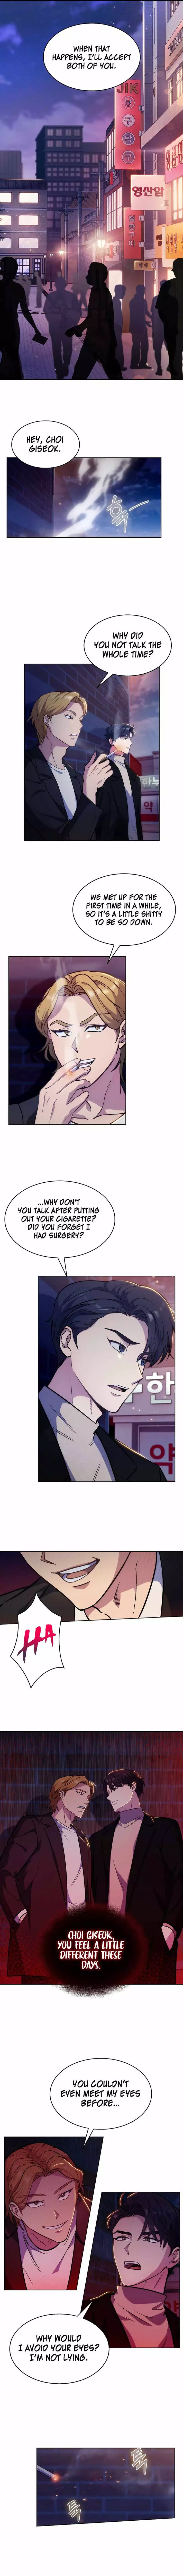 Level-Up Doctor (Manhwa) - 4 page 8-8eb3c83d